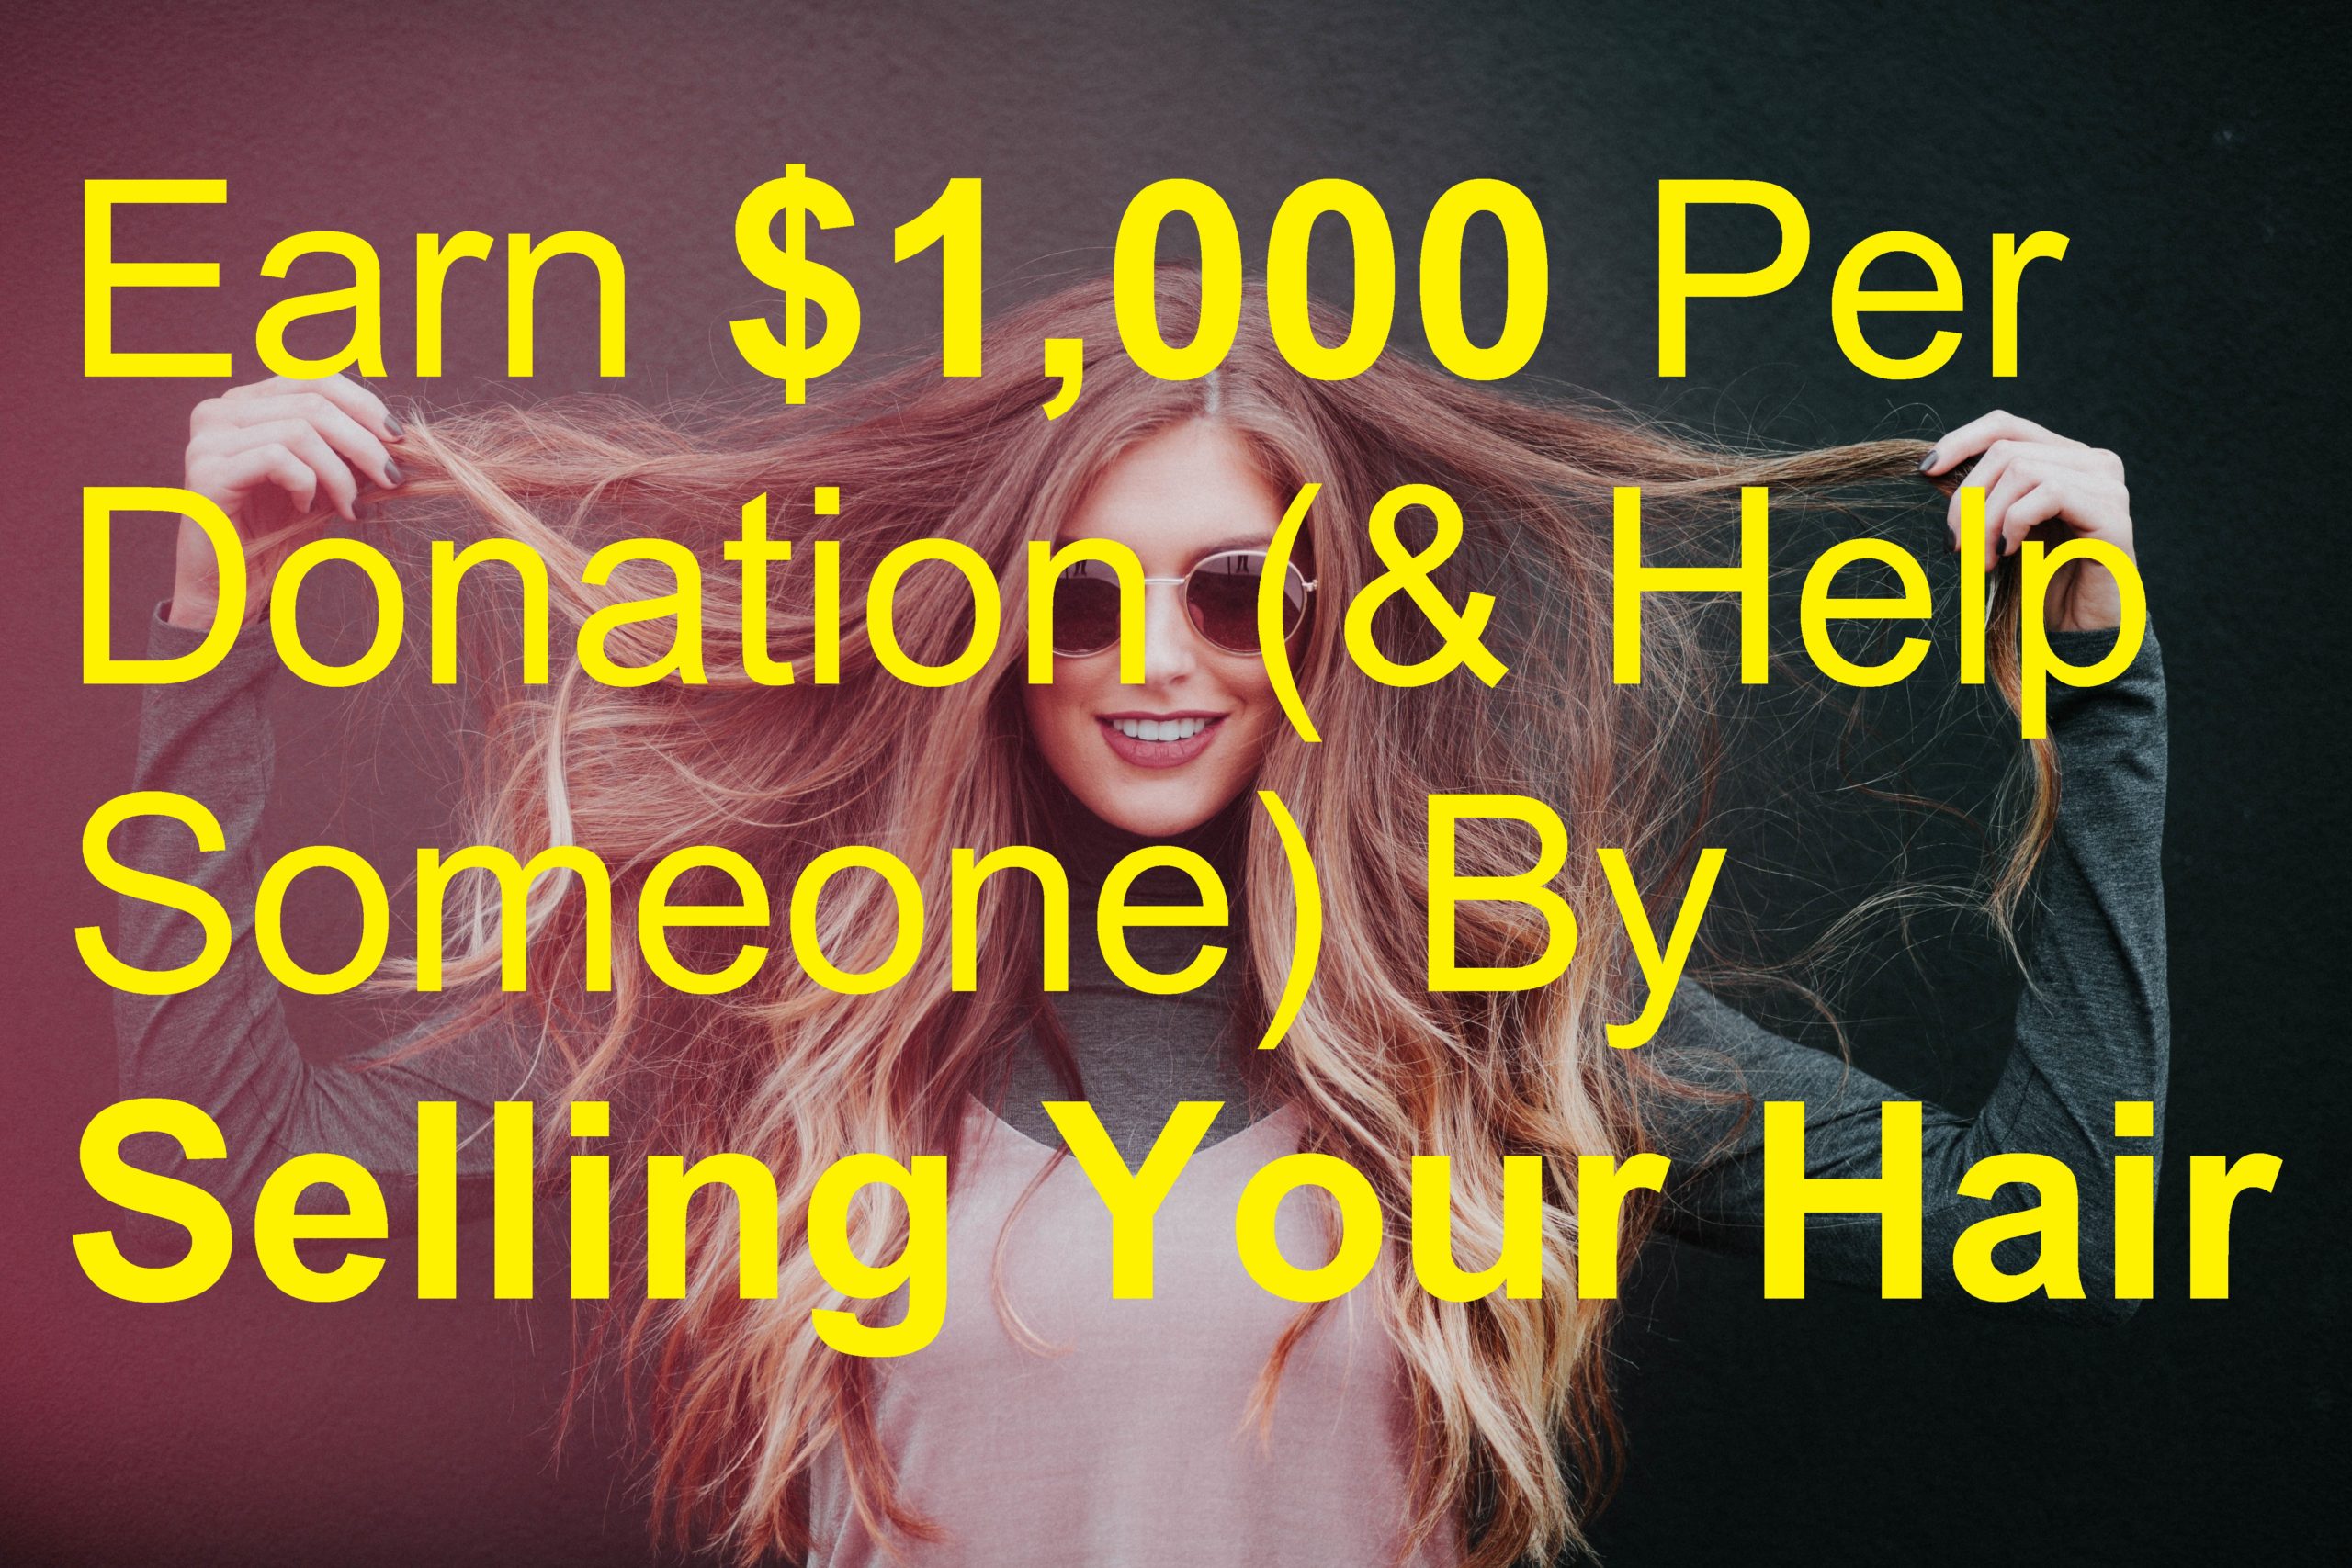 Earn $1,000 Per Donation (& Help Someone) By Selling Your Hair